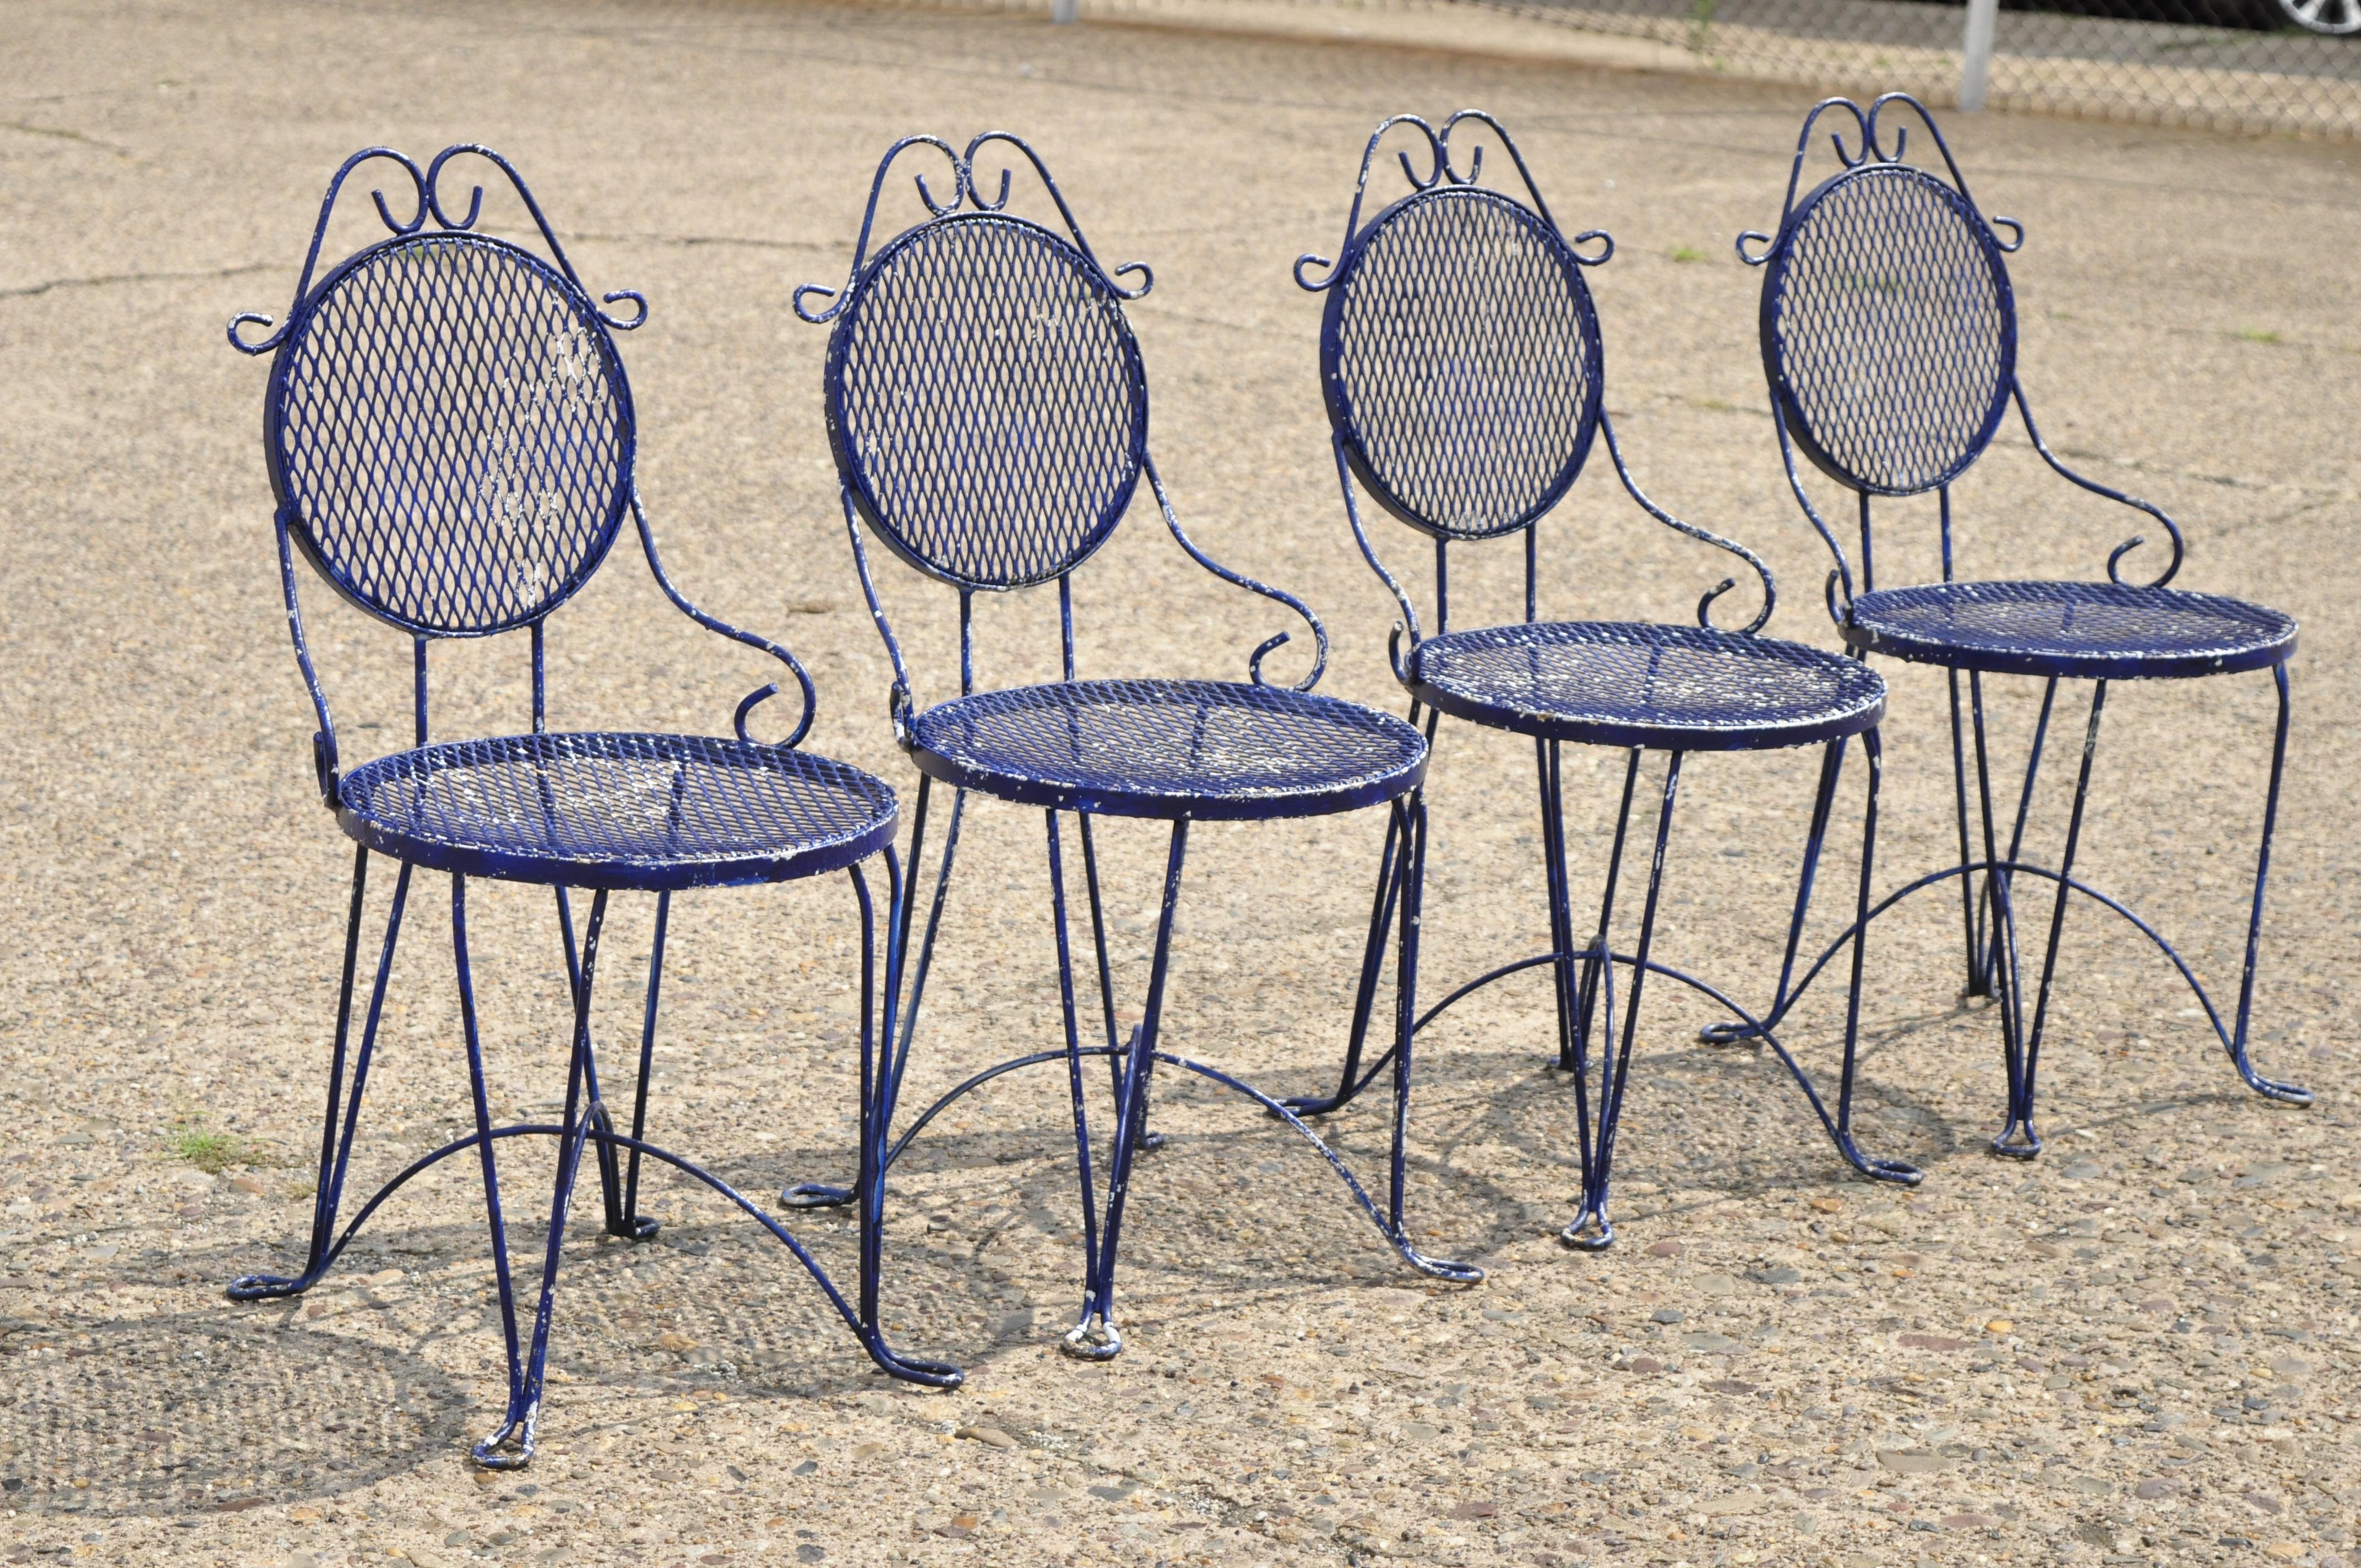 Vintage 20th century French Victorian style blue wrought iron garden bistro dining chairs - set of 4. Item features mesh seats and backs, wrought iron construction, distressed finish, great style and form, circa mid-20th century. Measurements: 32.5